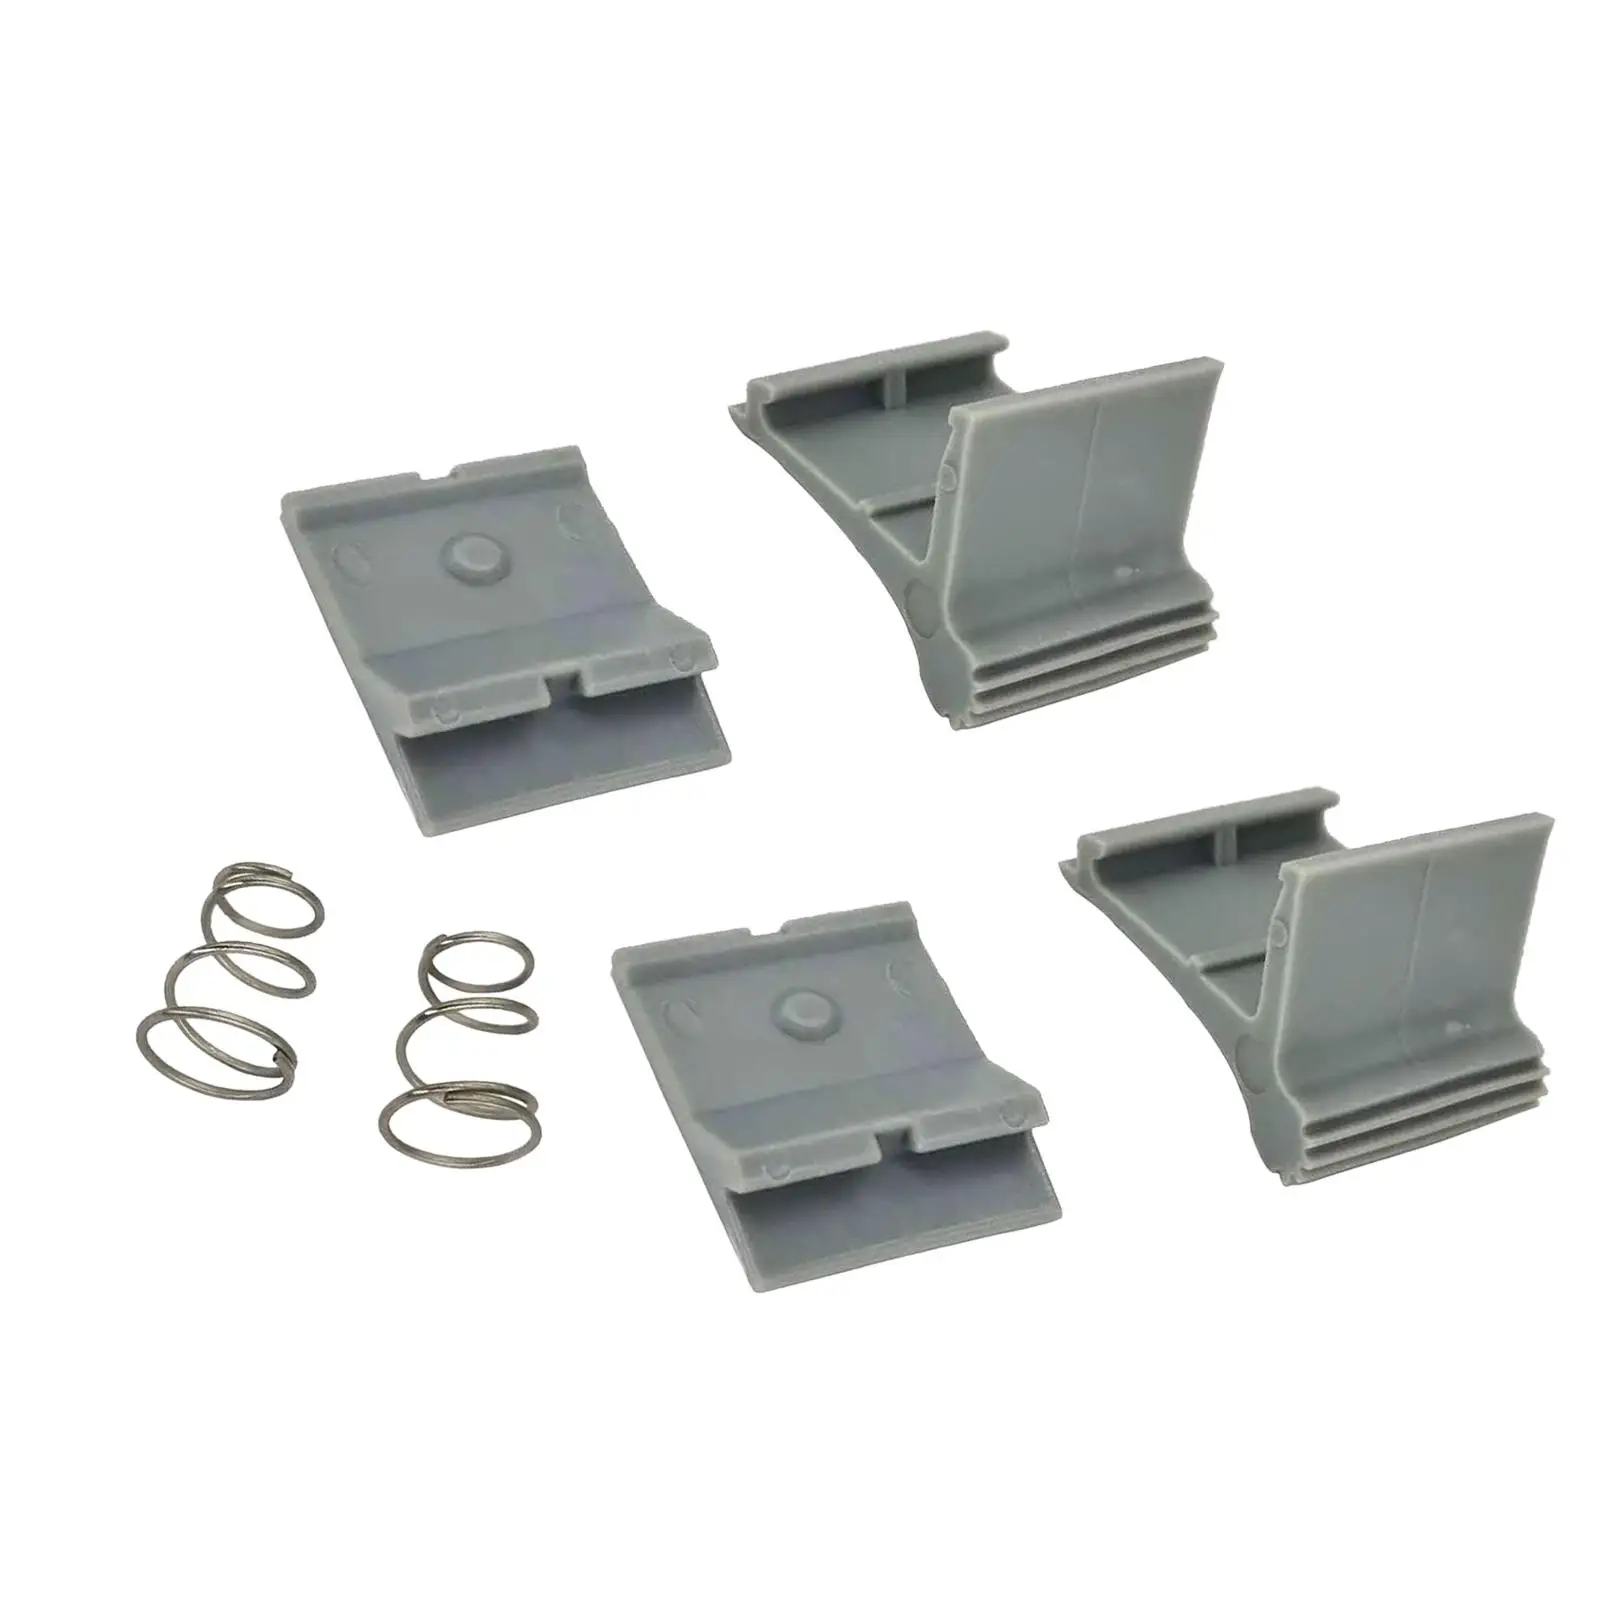 RV Awning Arm Slider Catch Set Replaces for Motorhome Camper Trailer